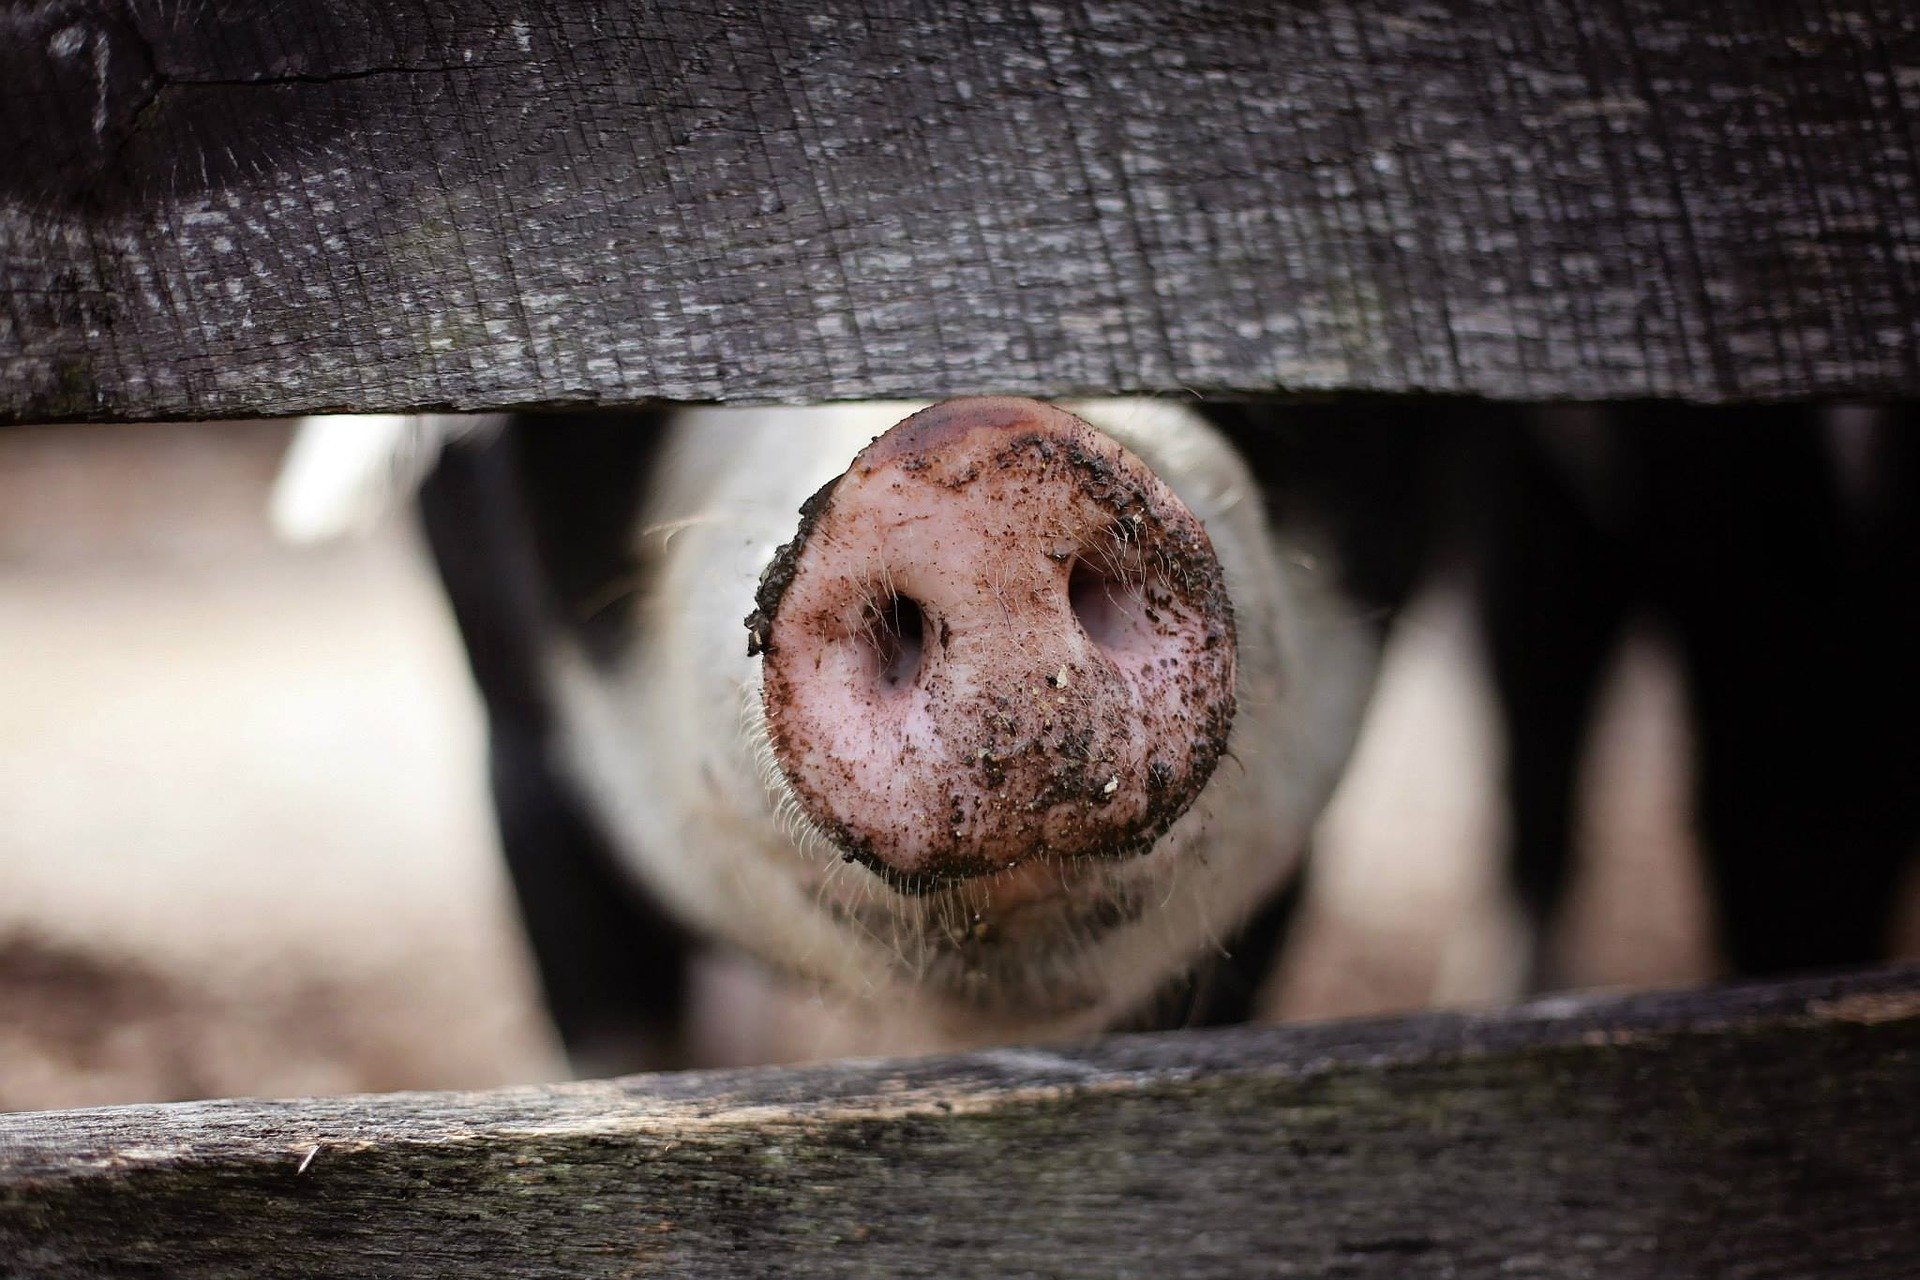 Many do not recognize animal agriculture's link to infectious diseases